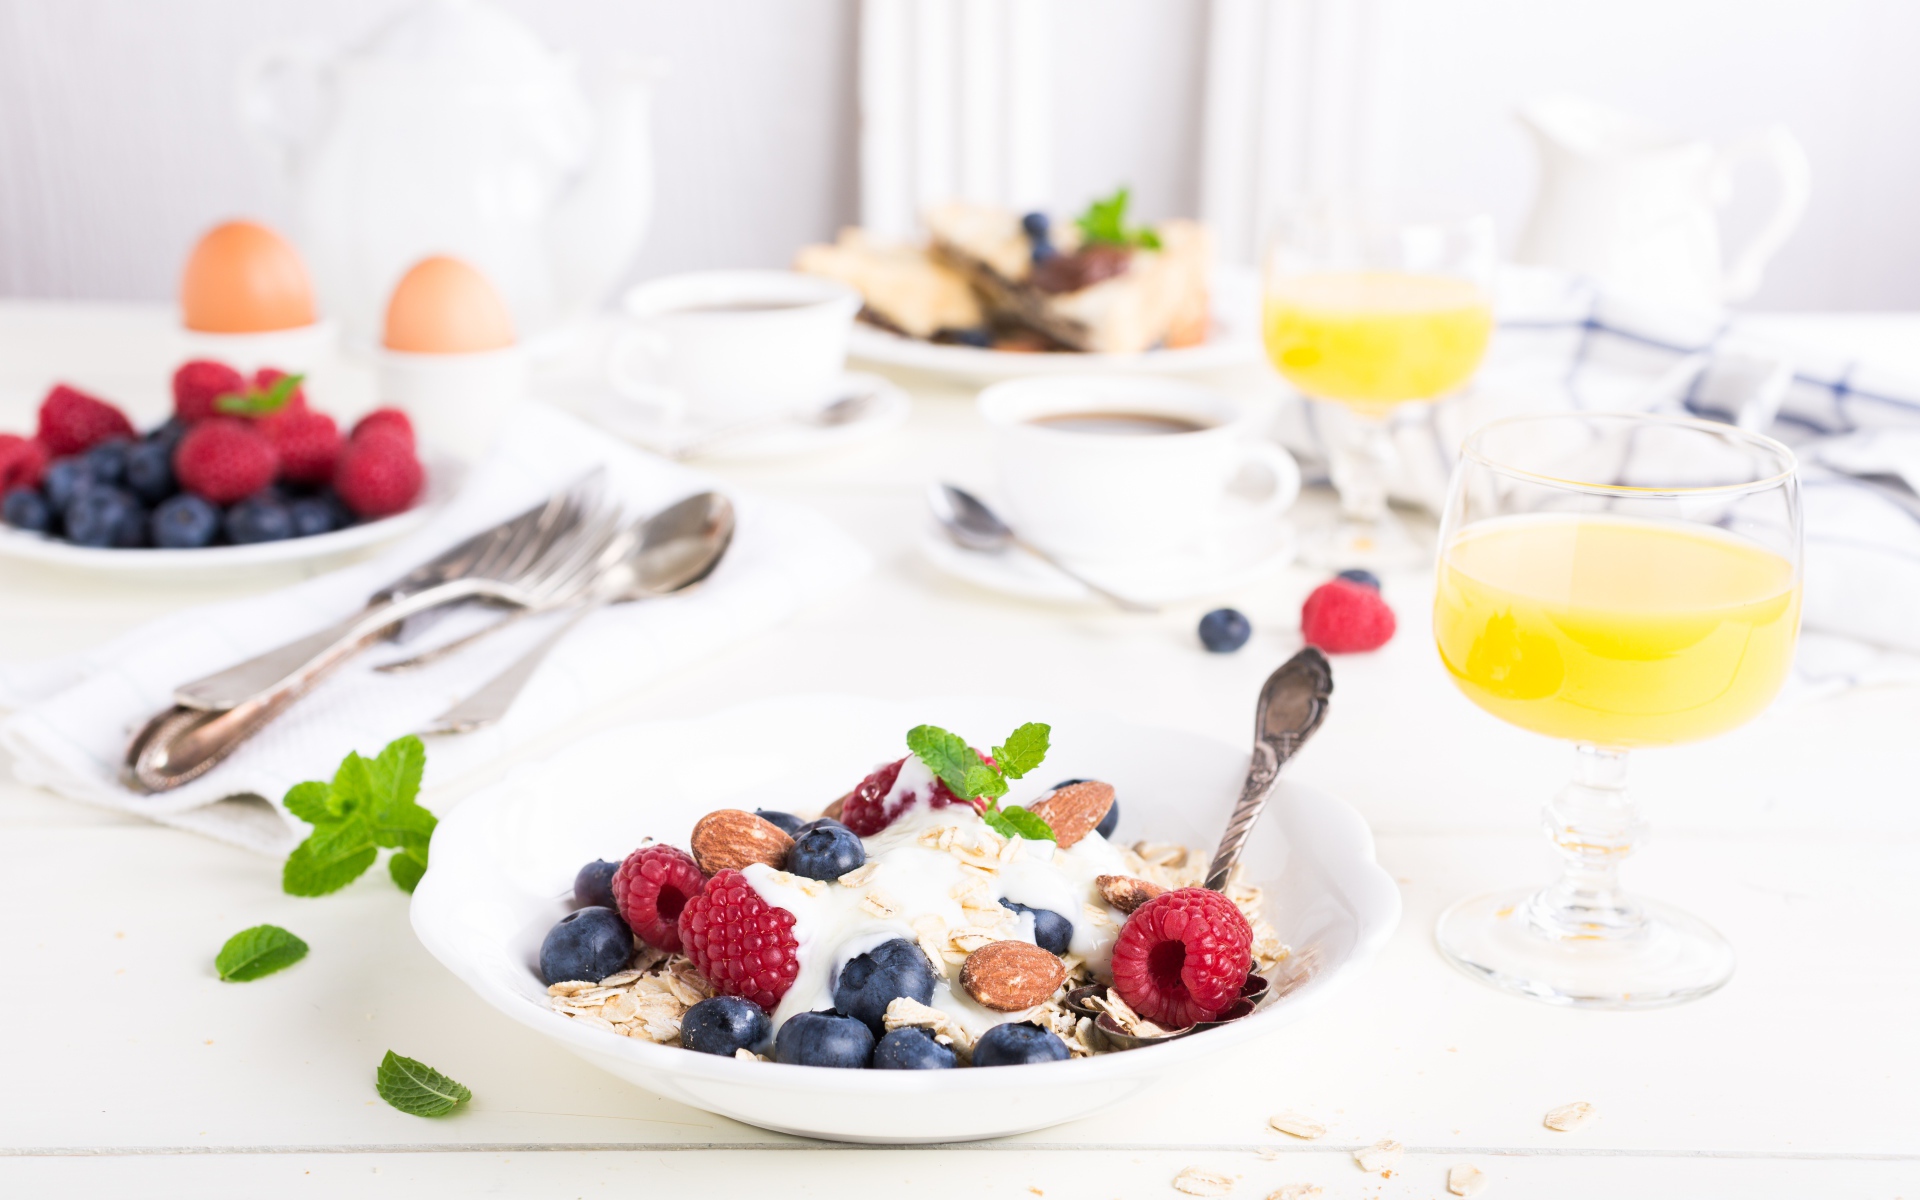 Oatmeal on a table with blueberries, raspberries and nuts